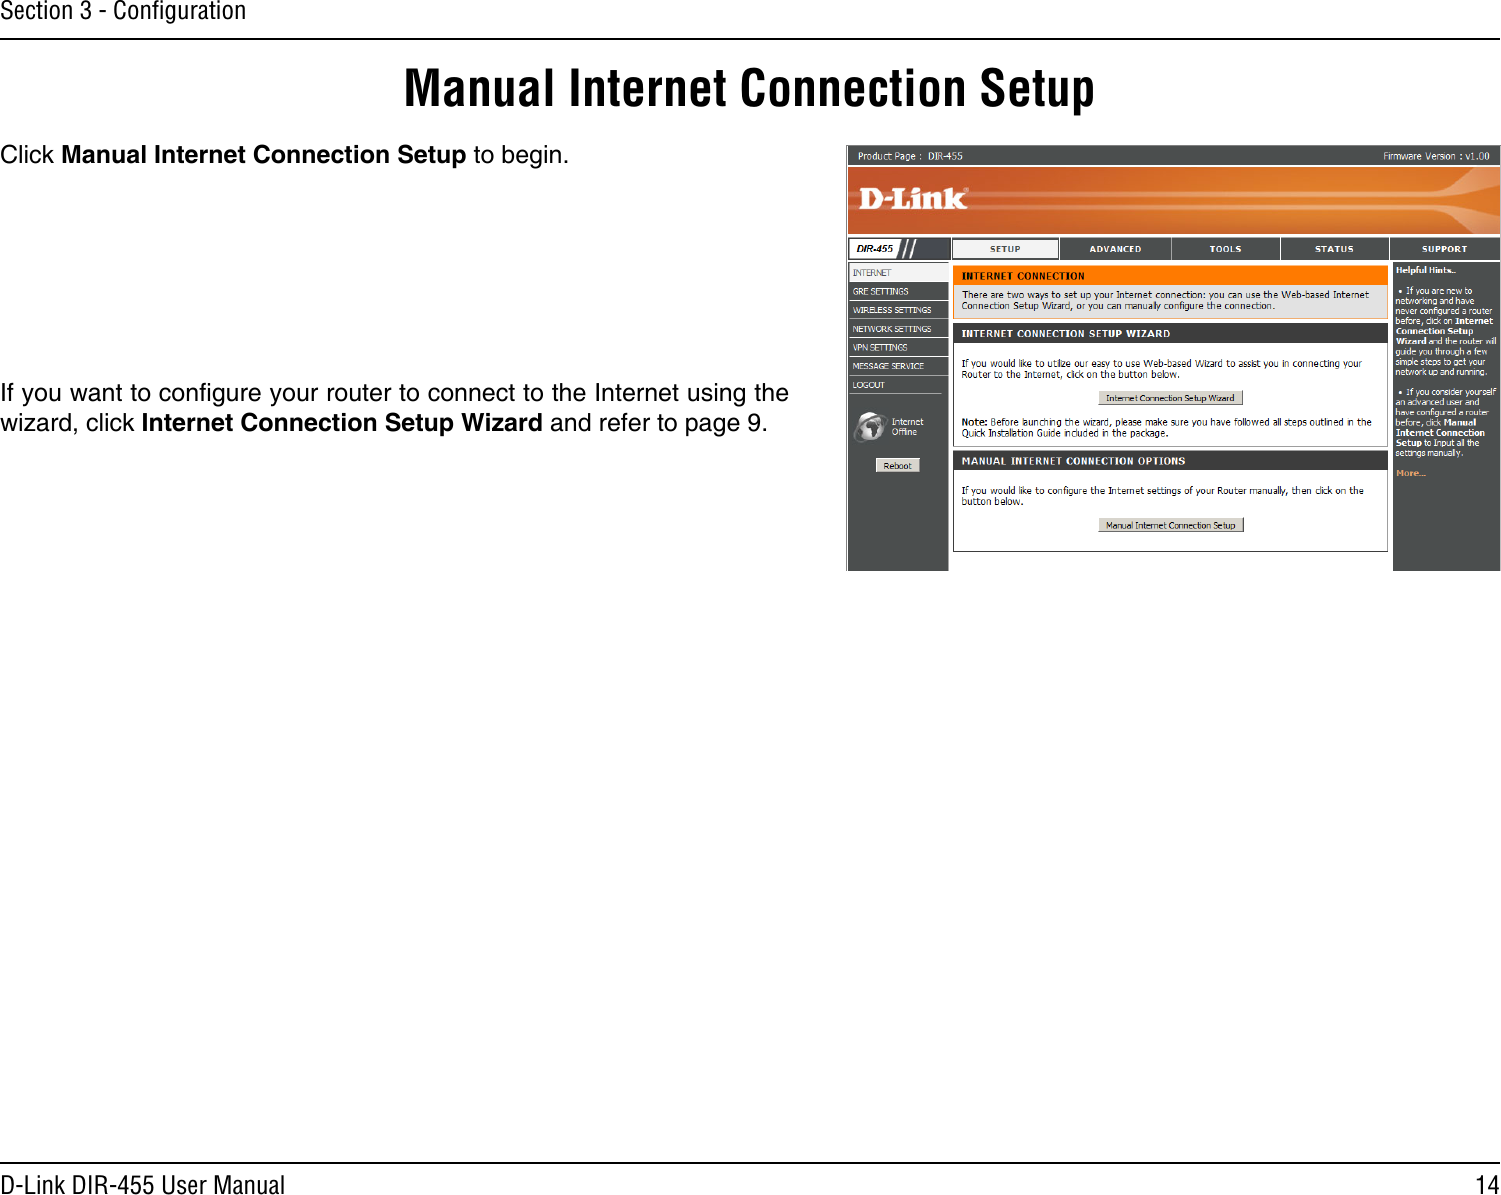 14D-Link DIR-455 User ManualSection 3 - ConﬁgurationManual Internet Connection SetupClick Manual Internet Connection Setup to begin.If you want to congure your router to connect to the Internet using the wizard, click Internet Connection Setup Wizard and refer to page 9.